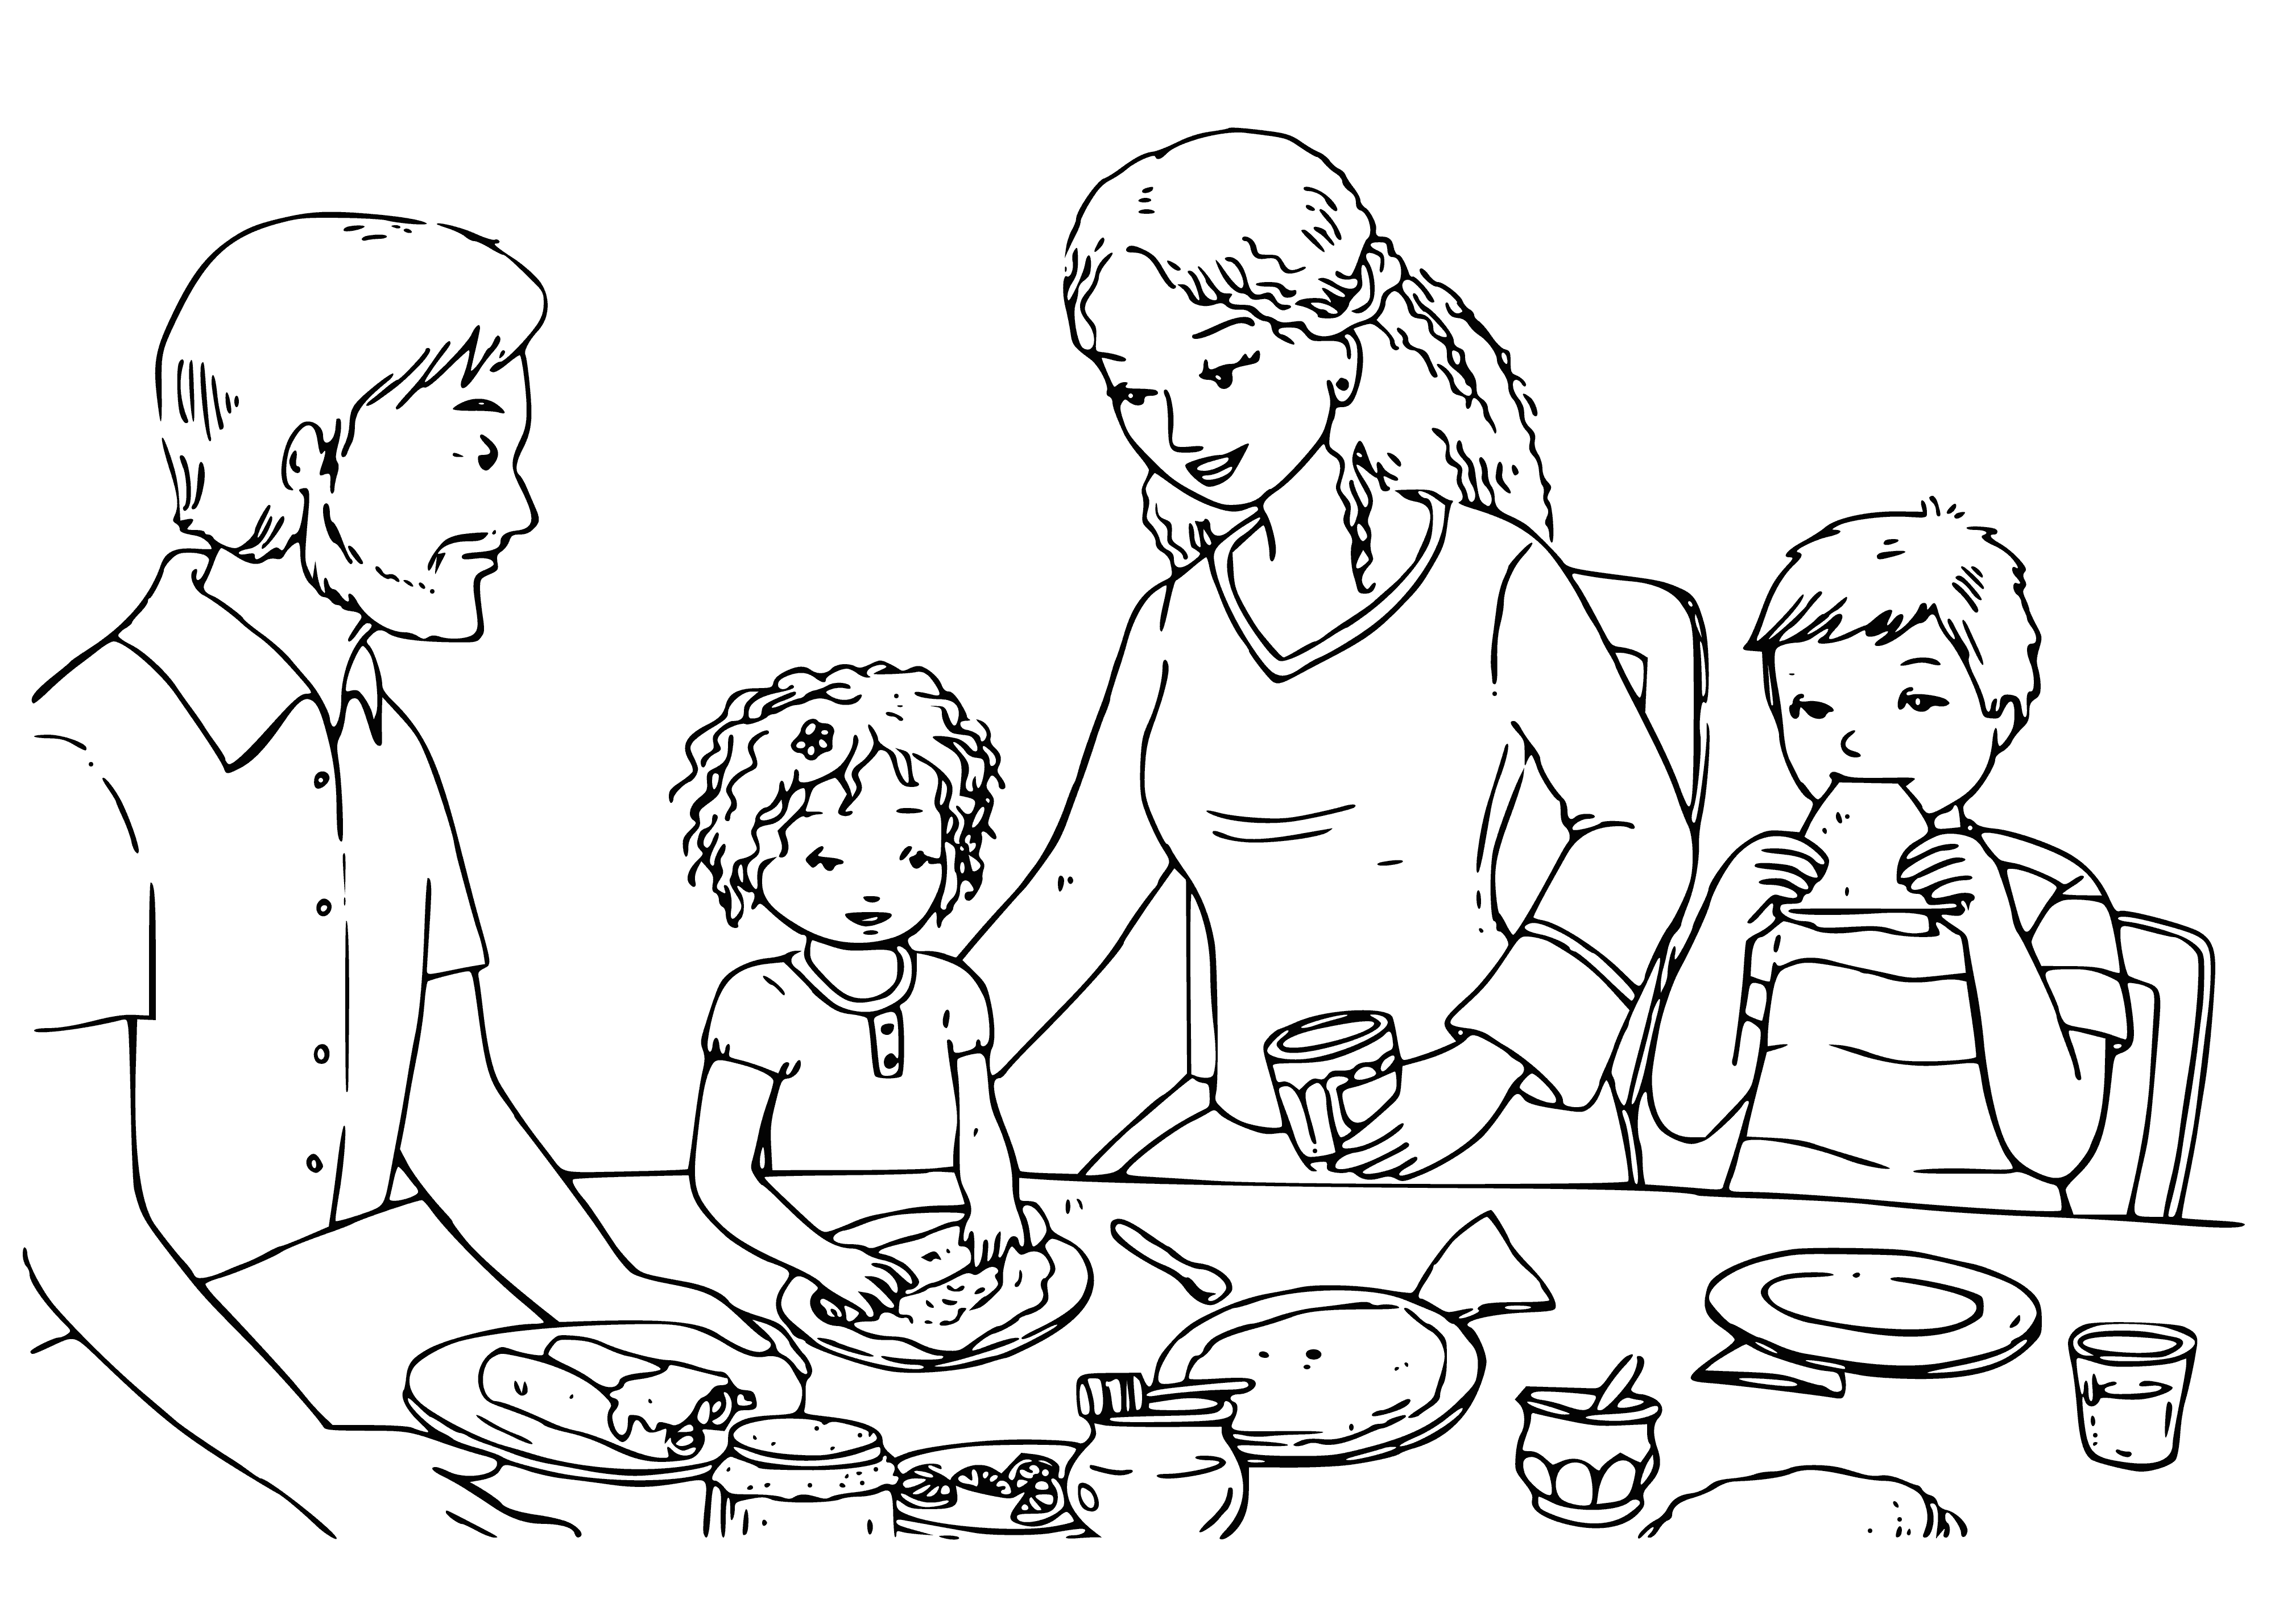 coloring page: Five pancakes colored differently with toppings of chocolate chips, blueberries, bananas, strawberries, and cream.